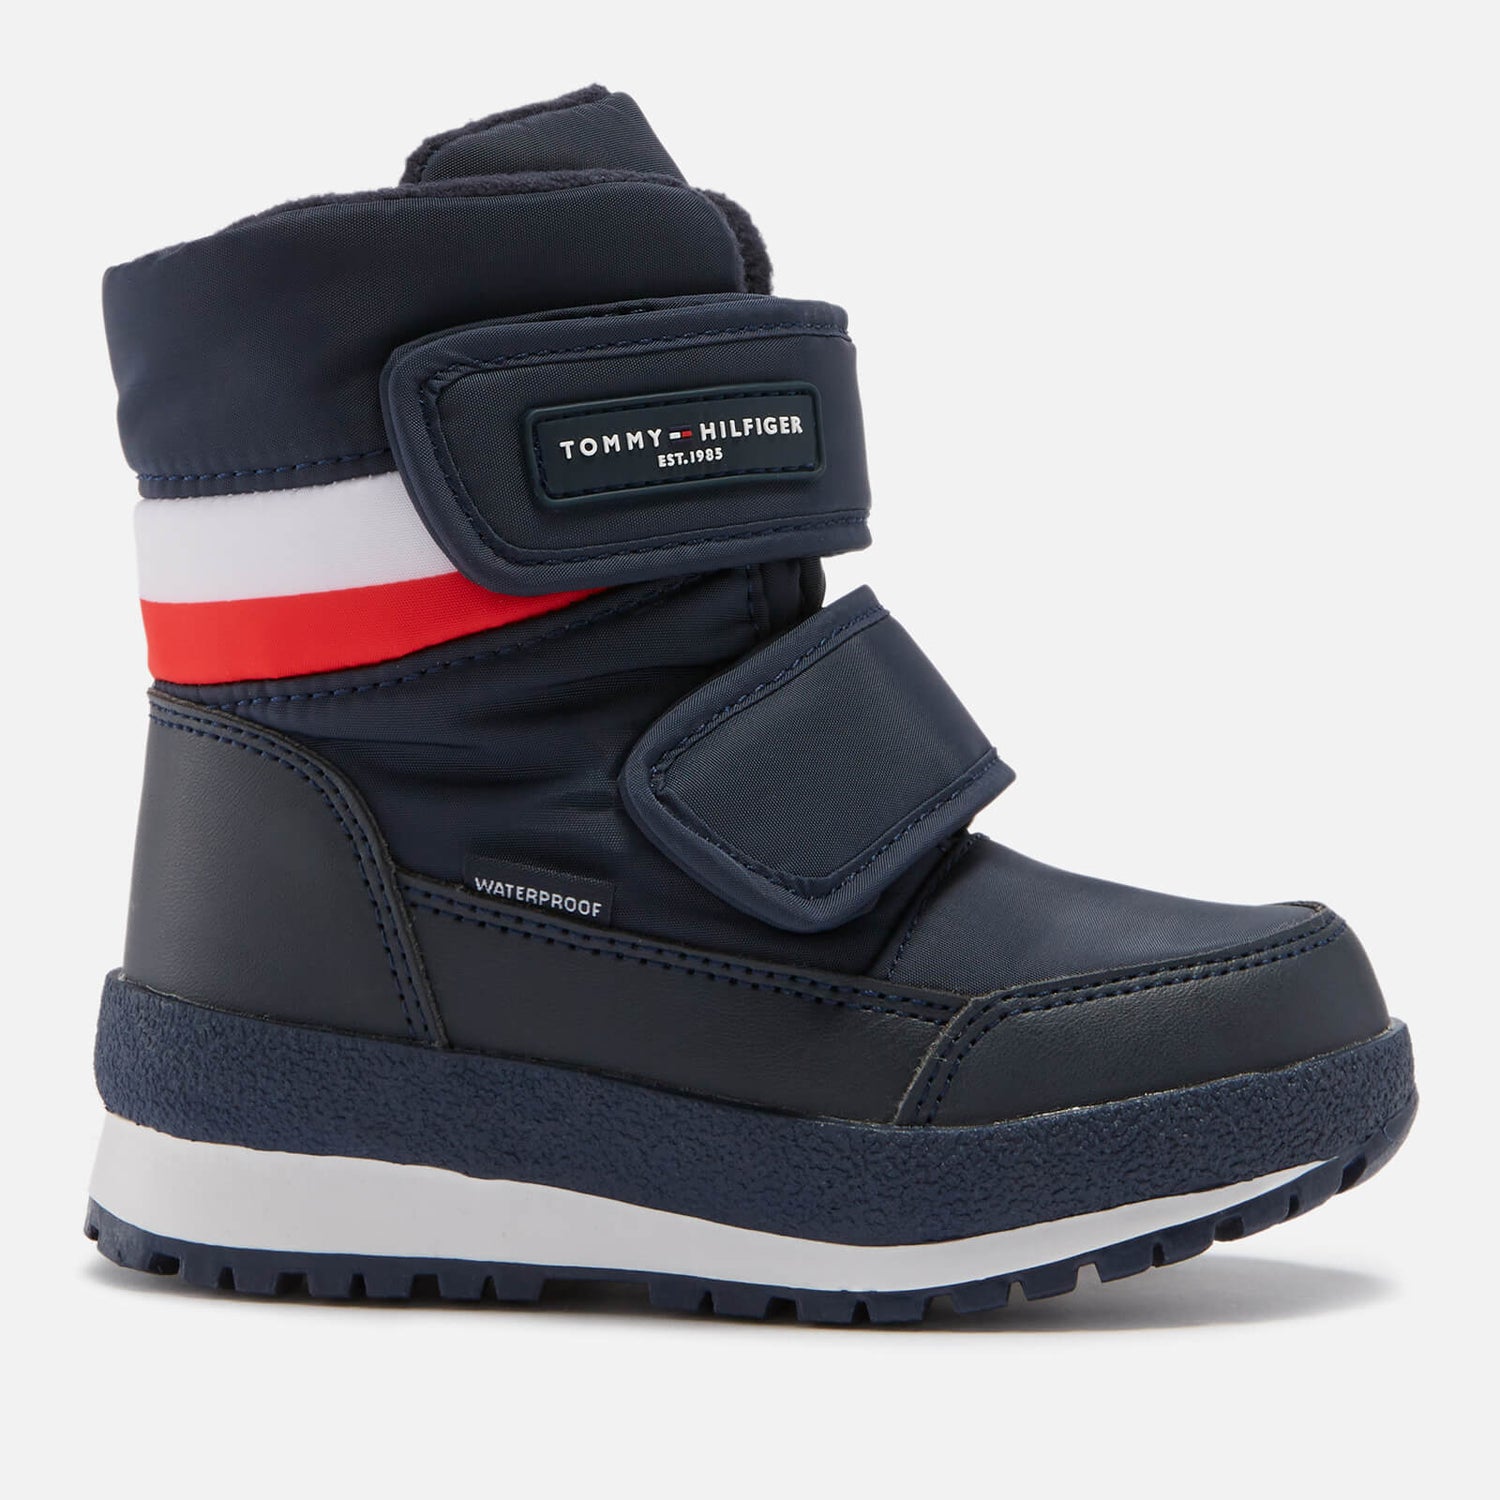 Tommy Hilfiger Kids' Coated Nylon Shell Snow Boots - UK 7 Toddler